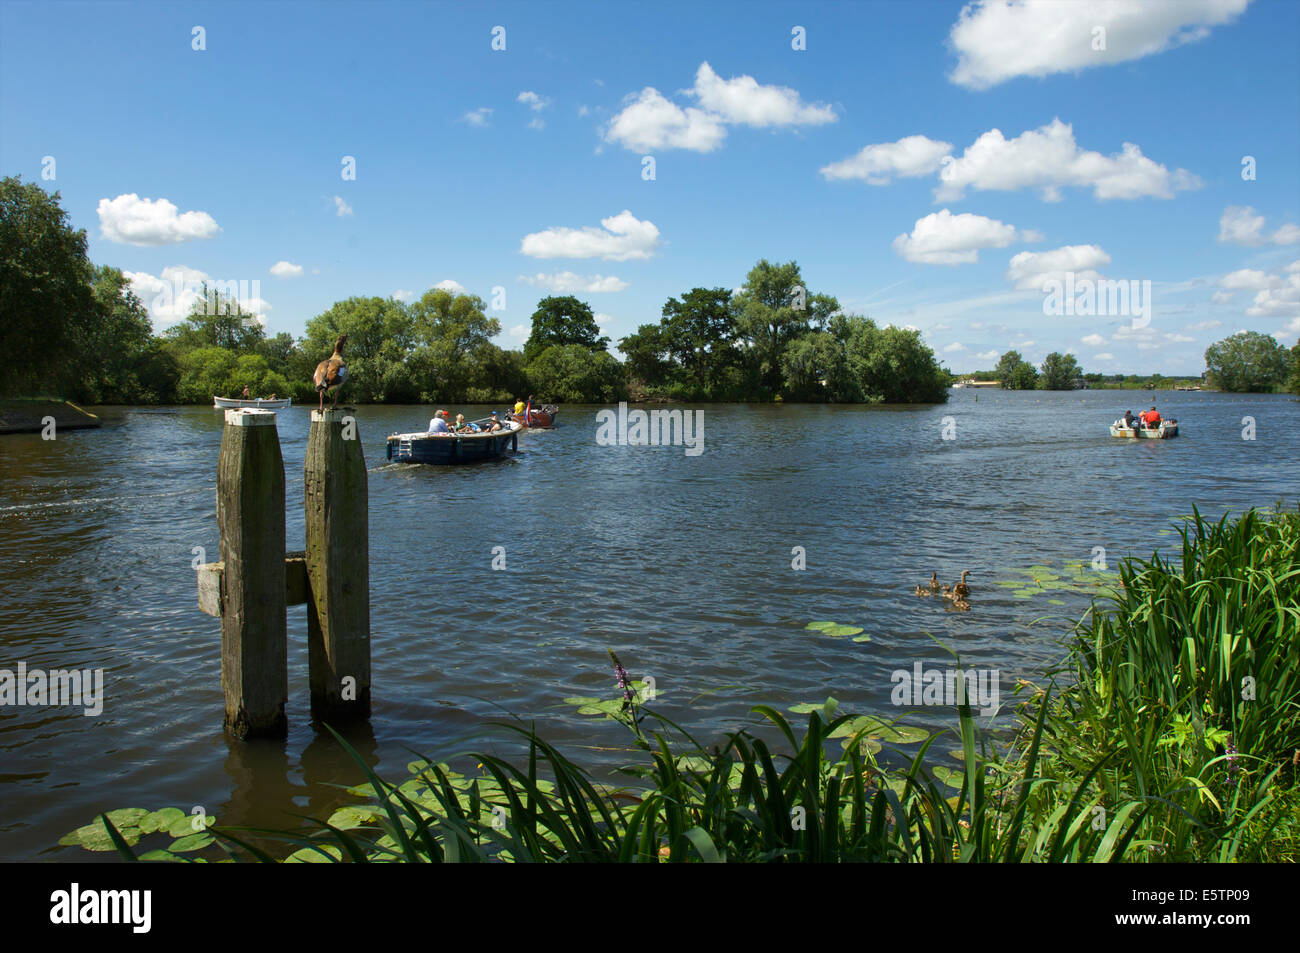 The river Vecht in the Netherlands with boats and Egyptian geese on a sunny summer day Stock Photo